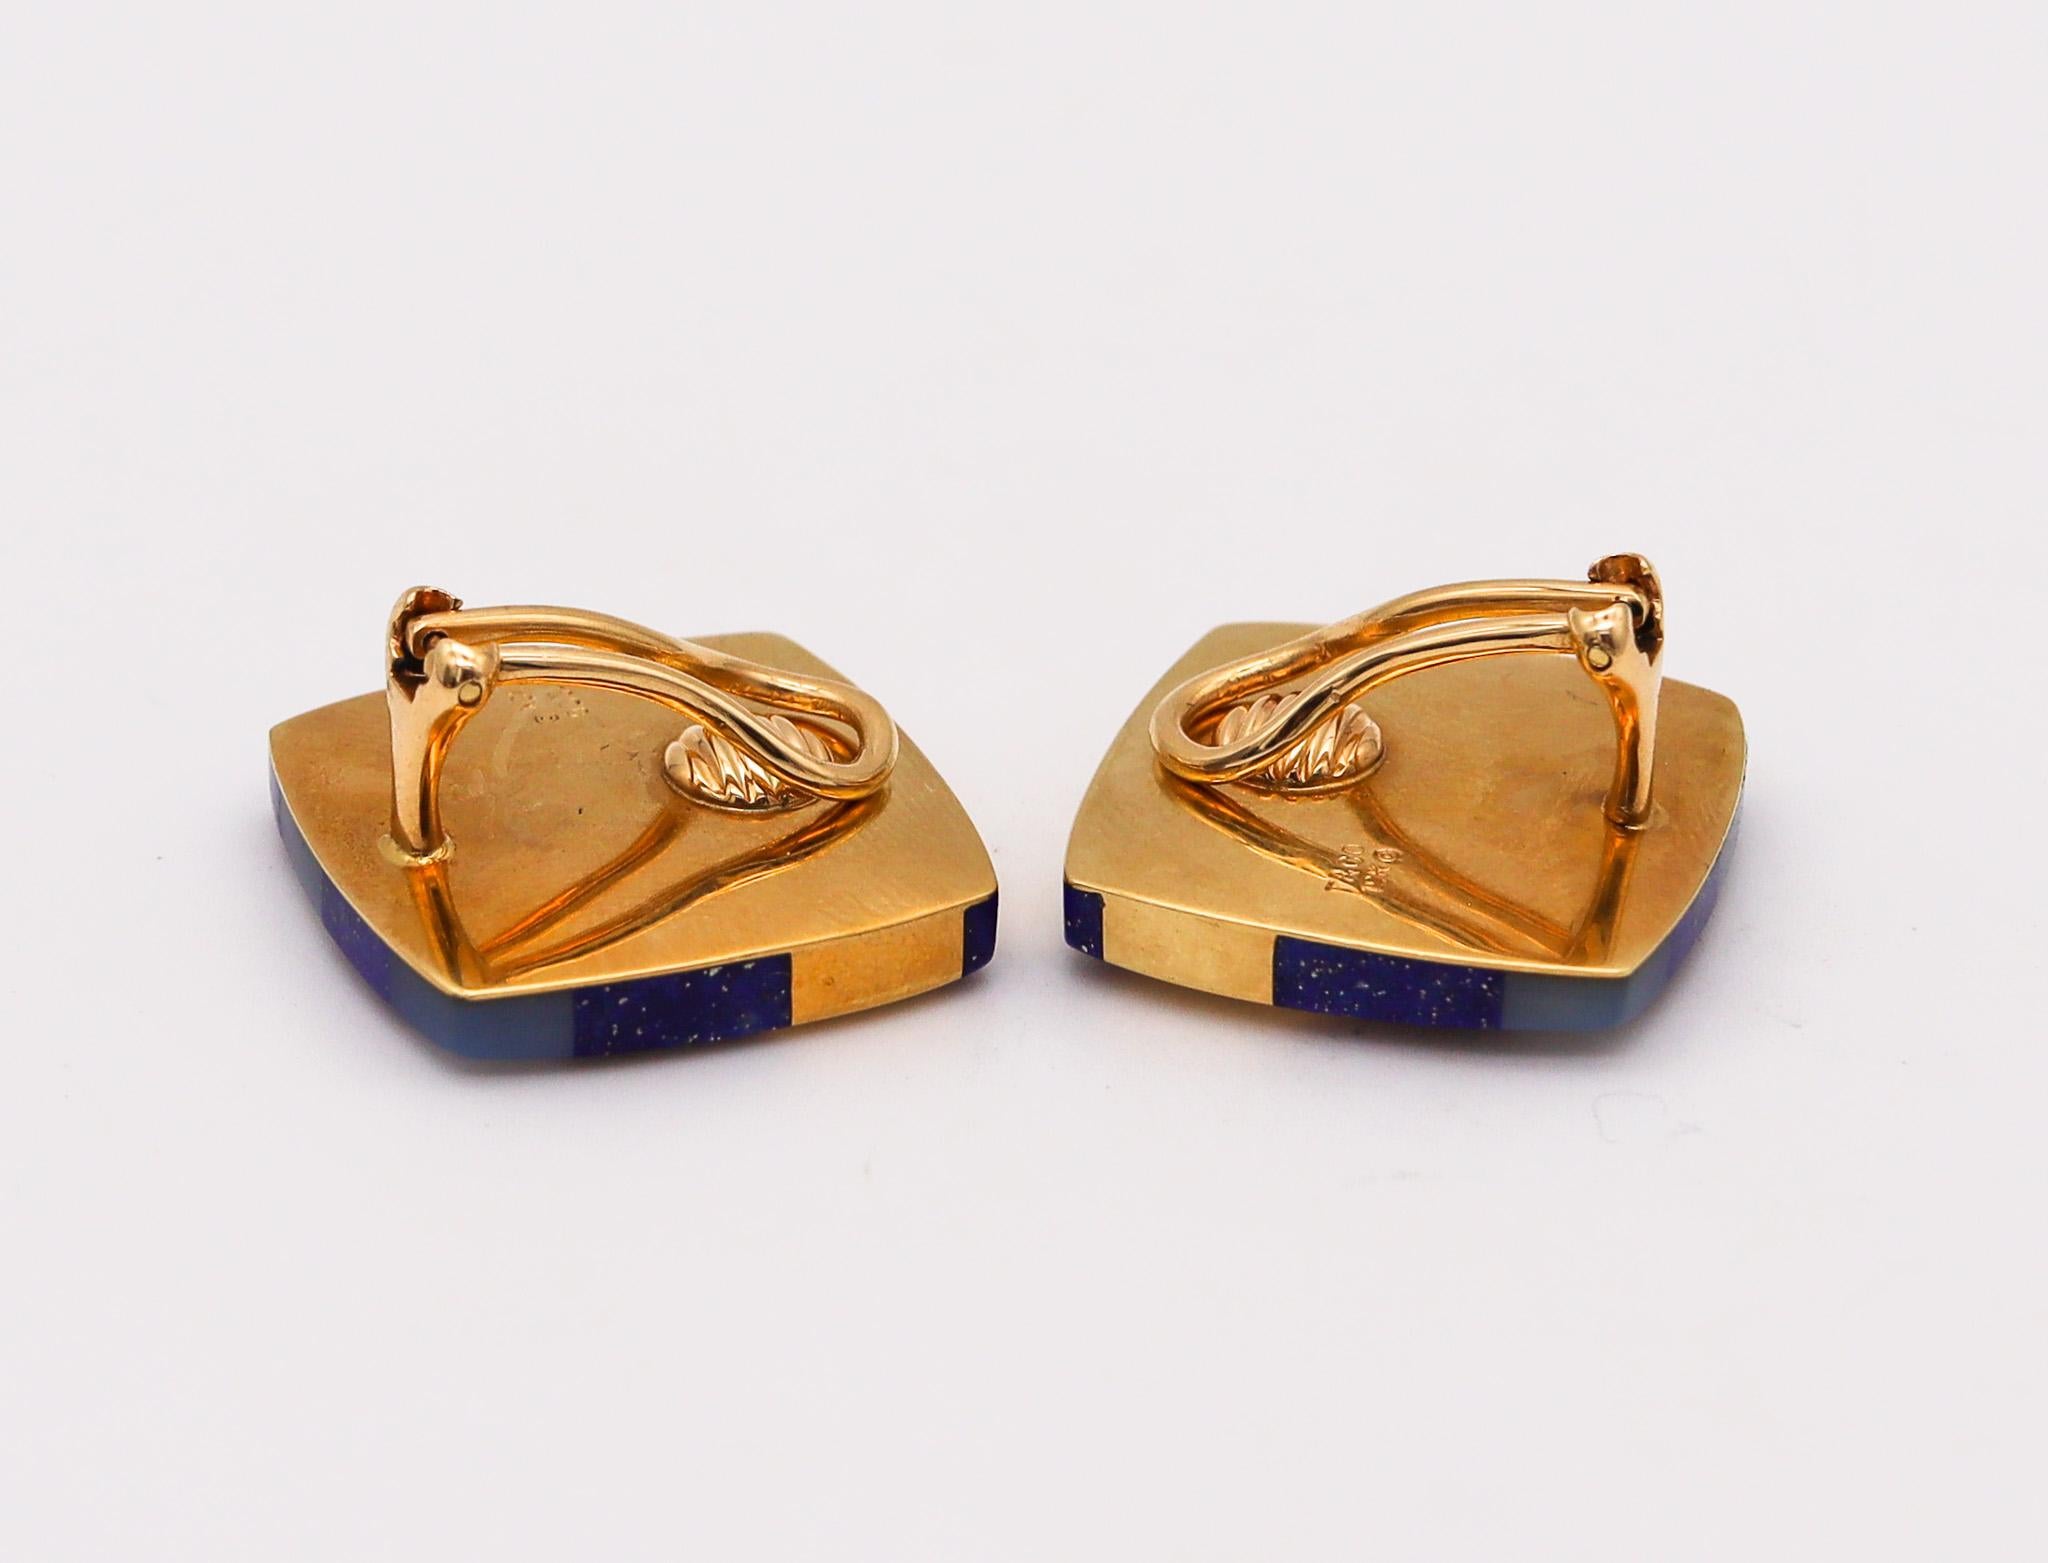 Modernist Tiffany & Co. 1977 Angela Cummings Clips Earrings 18kt Gold with Lapis and Nacre